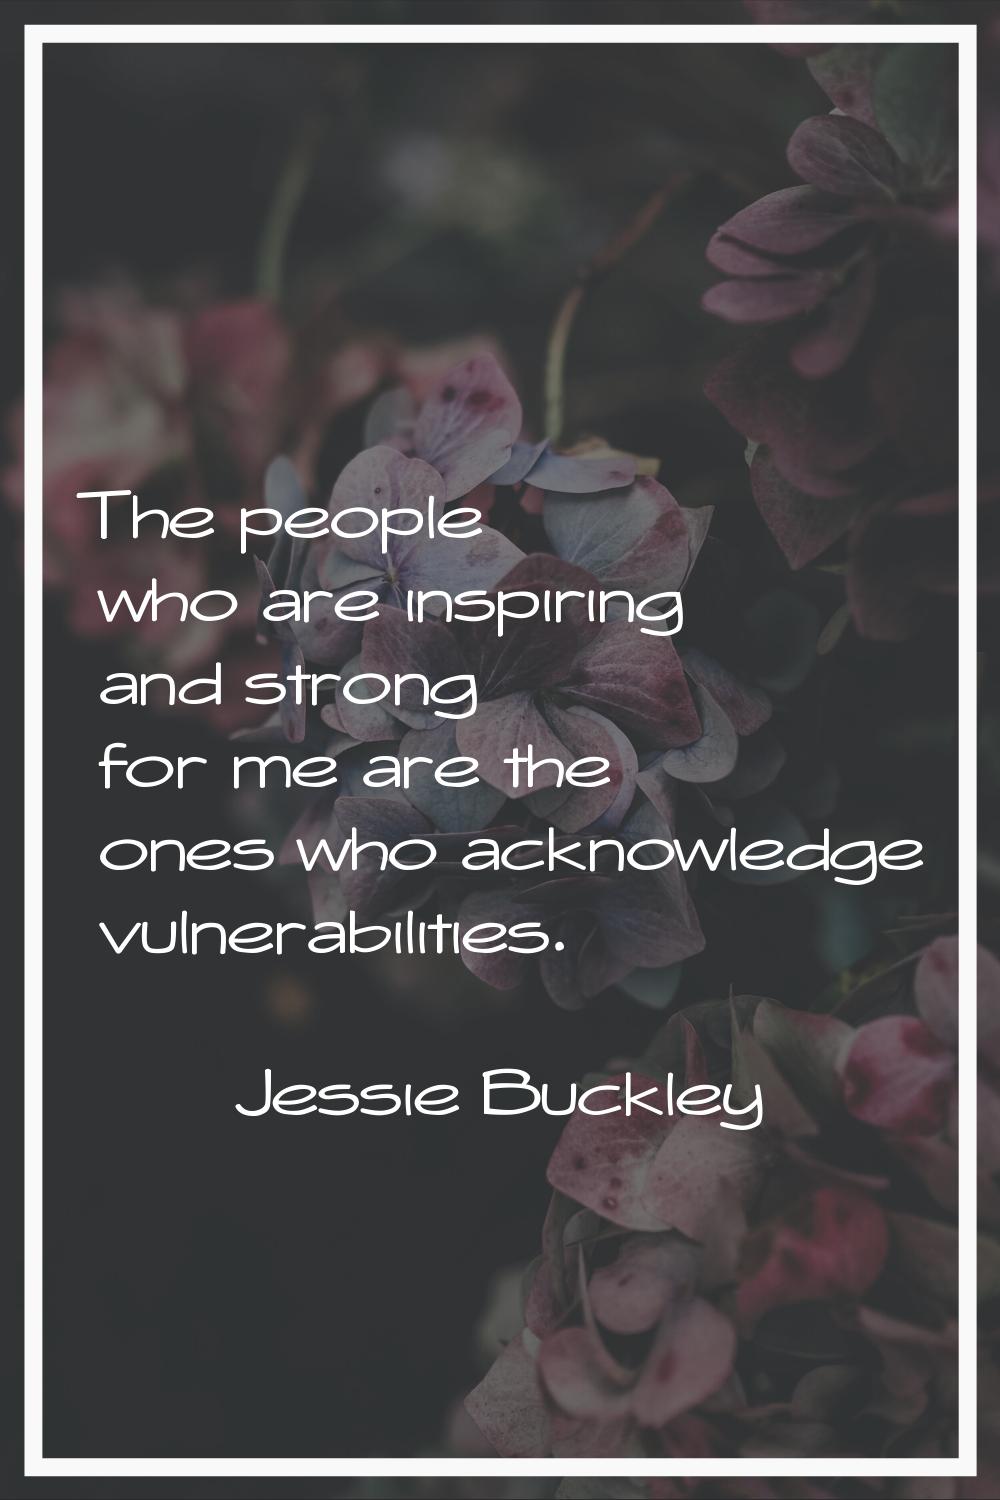 The people who are inspiring and strong for me are the ones who acknowledge vulnerabilities.